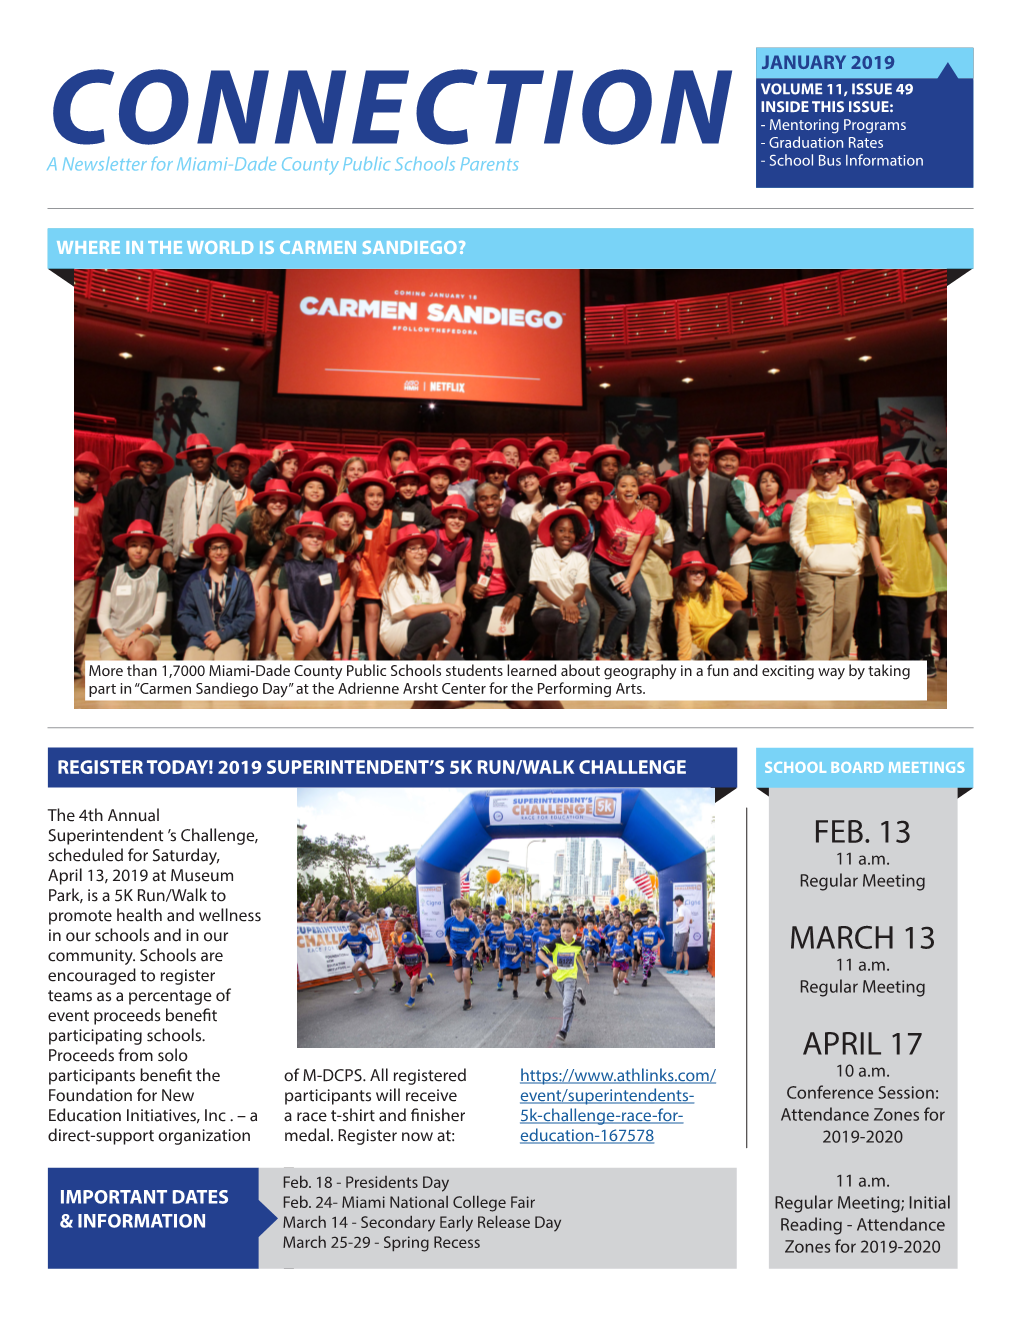 CONNECTION - School Bus Information a Newsletter for Miami-Dade County Public Schools Parents